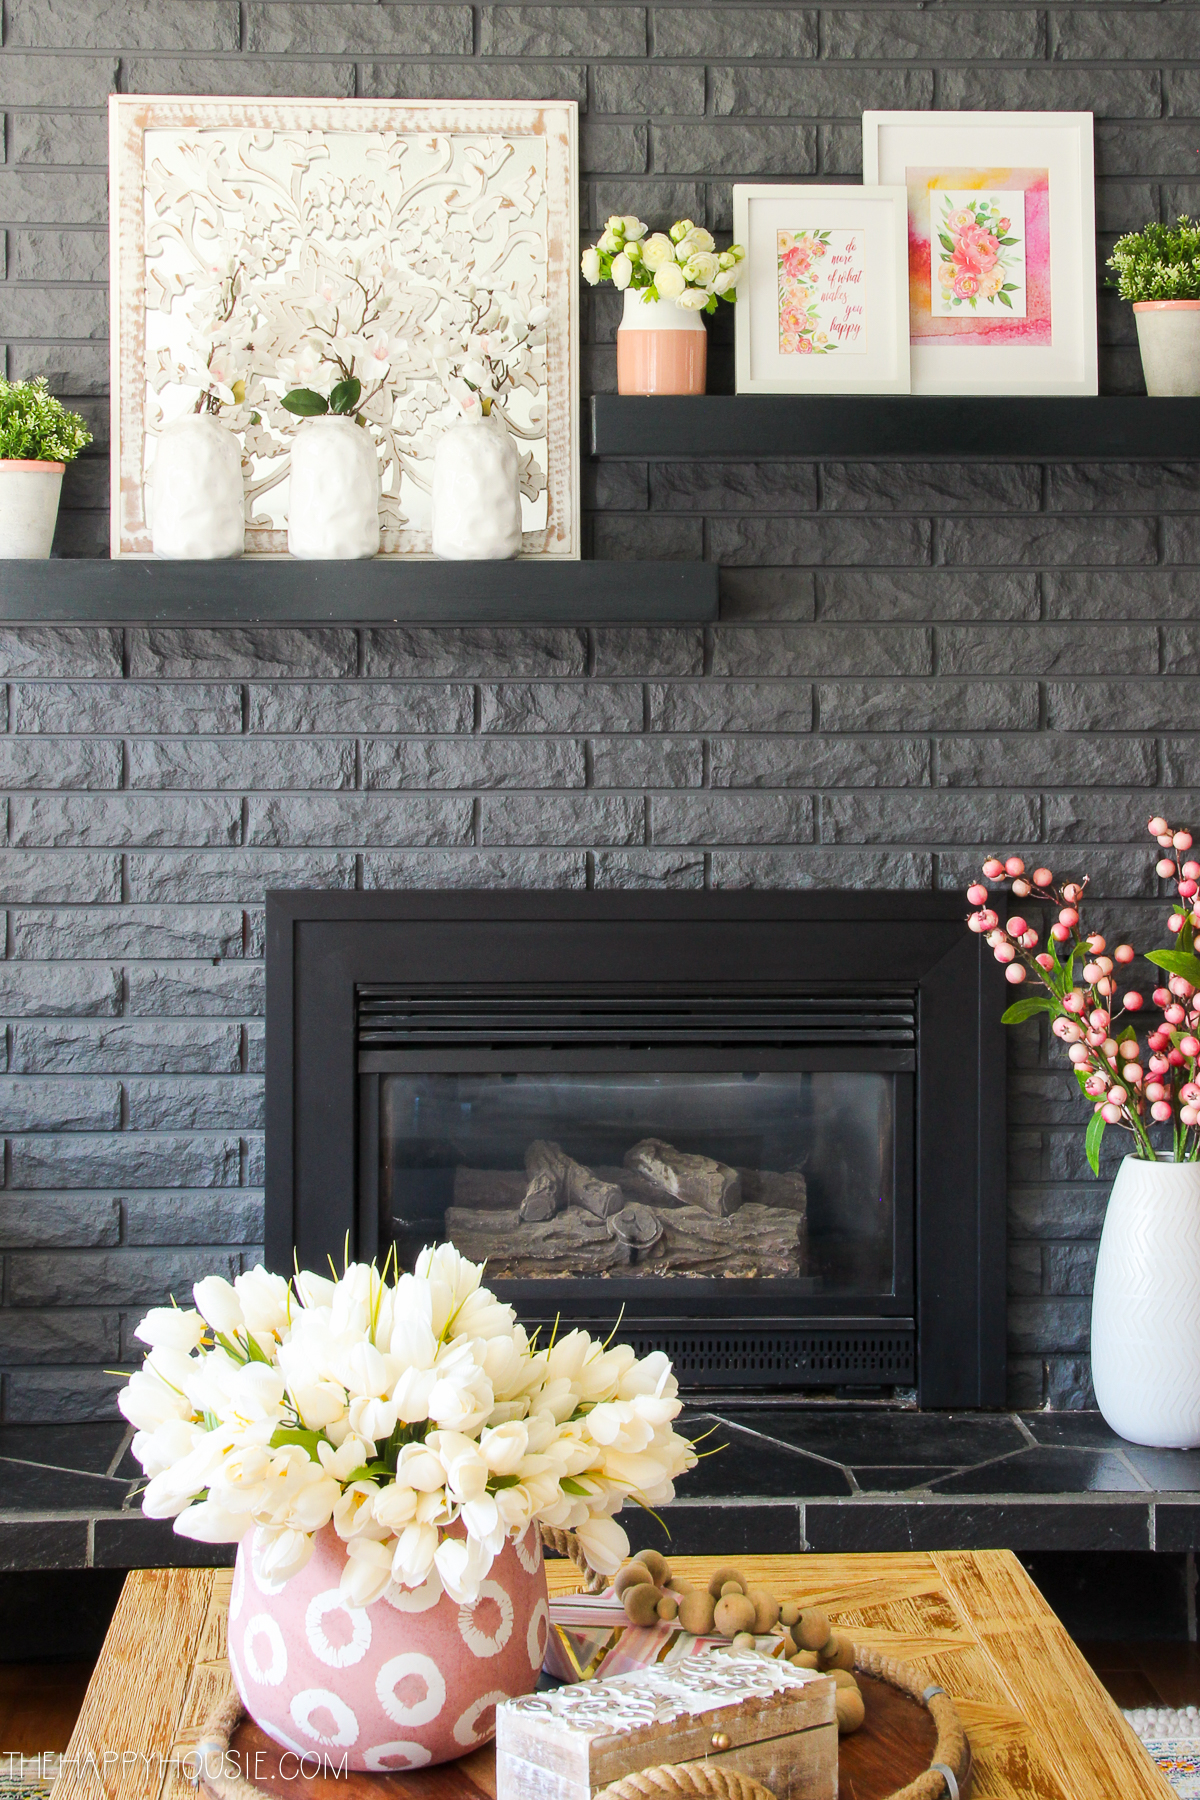 Black shelves with pictures and vases are above the fireplace.